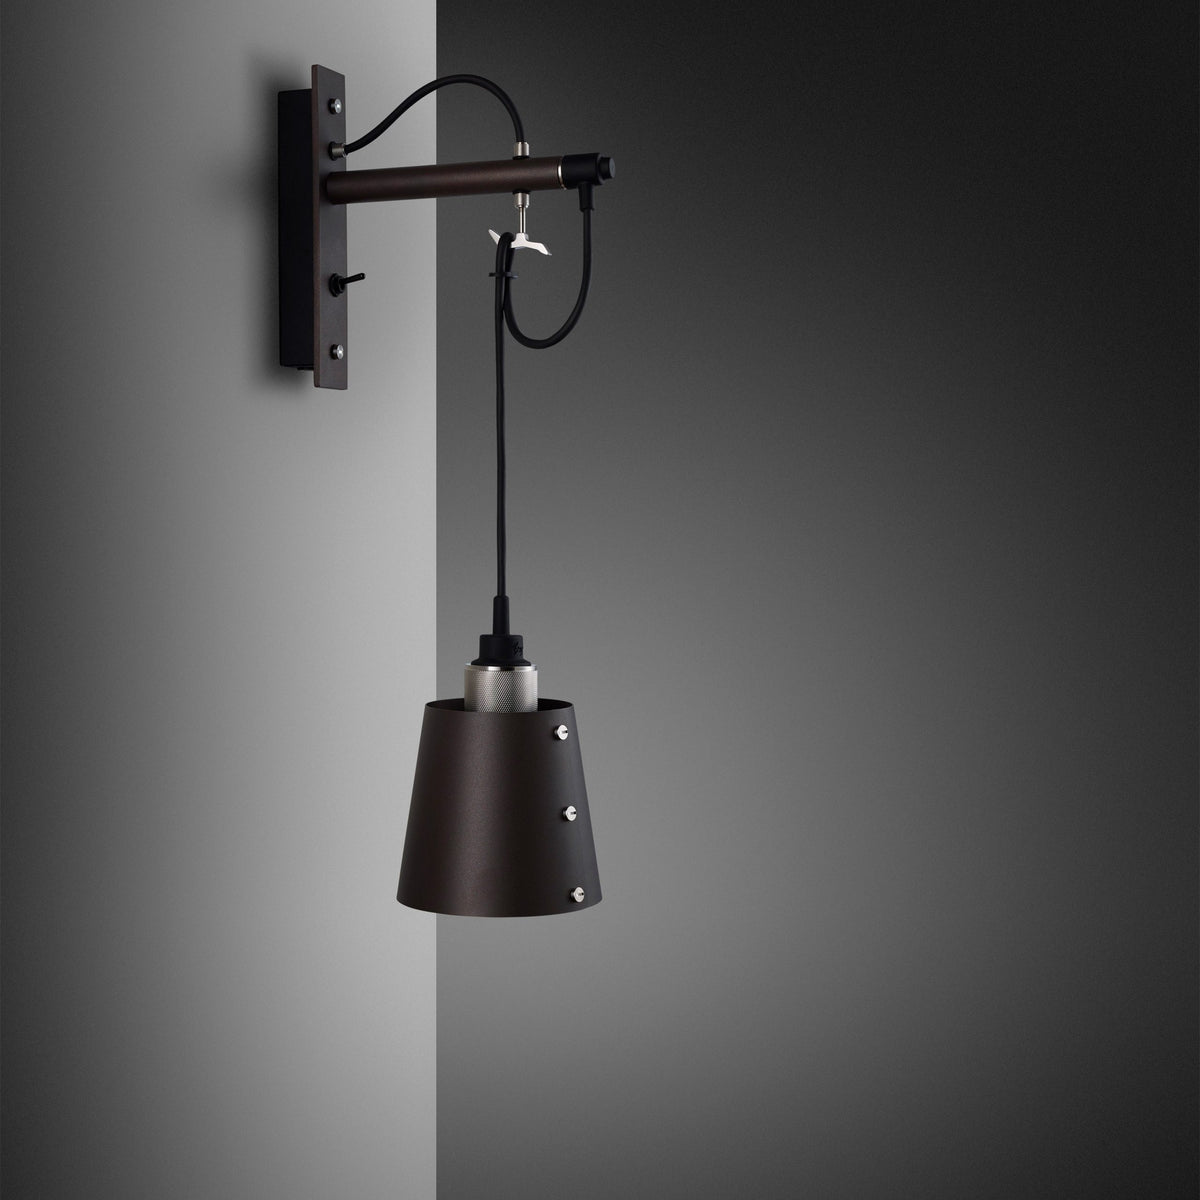 Buster + Punch - NHW-19516 - Hooked Wall Light - Hooked - Graphite / Steel